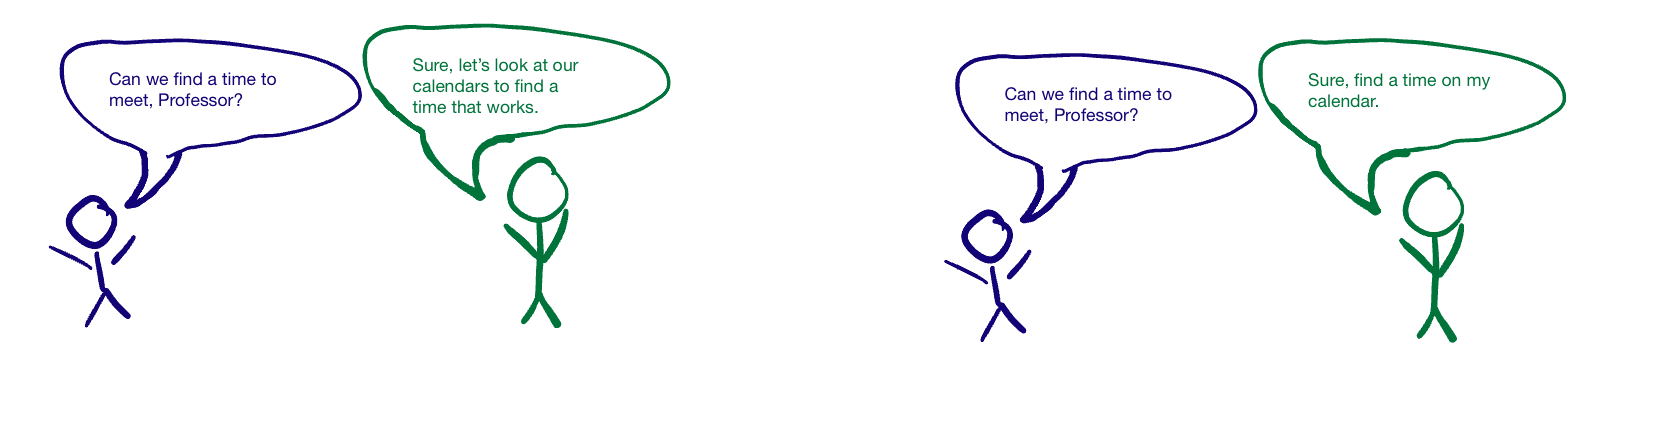 A pair of stick figure images, duplicated. In each pair a student is asking a professor for time to meet. In the left pair, the professor responds in a speech bubble with, "Sure, let's look at our calendars to find a time that works." In the right pair, the professor responds with, "Sure, find a time on my calendar."